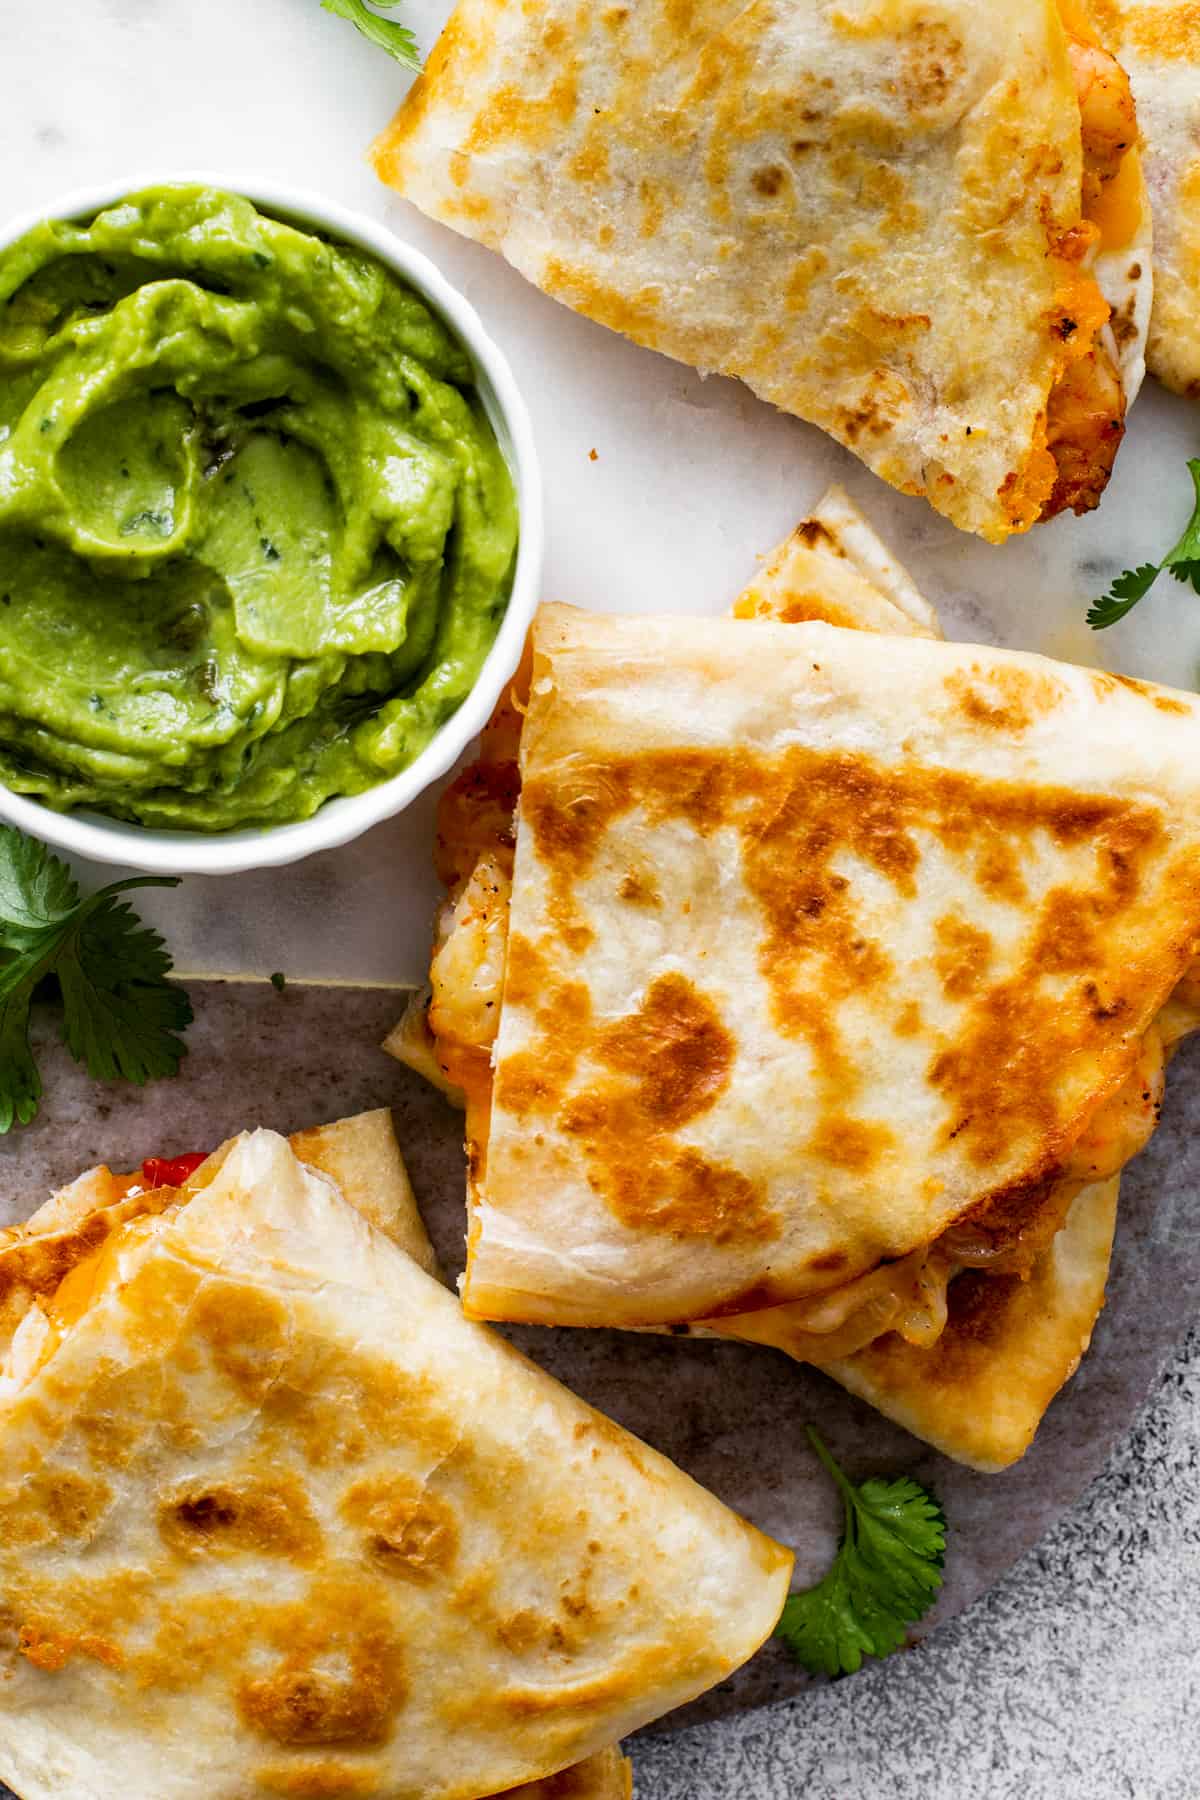 breakfast quesadillas with red pepper and cilantro served with guacamole